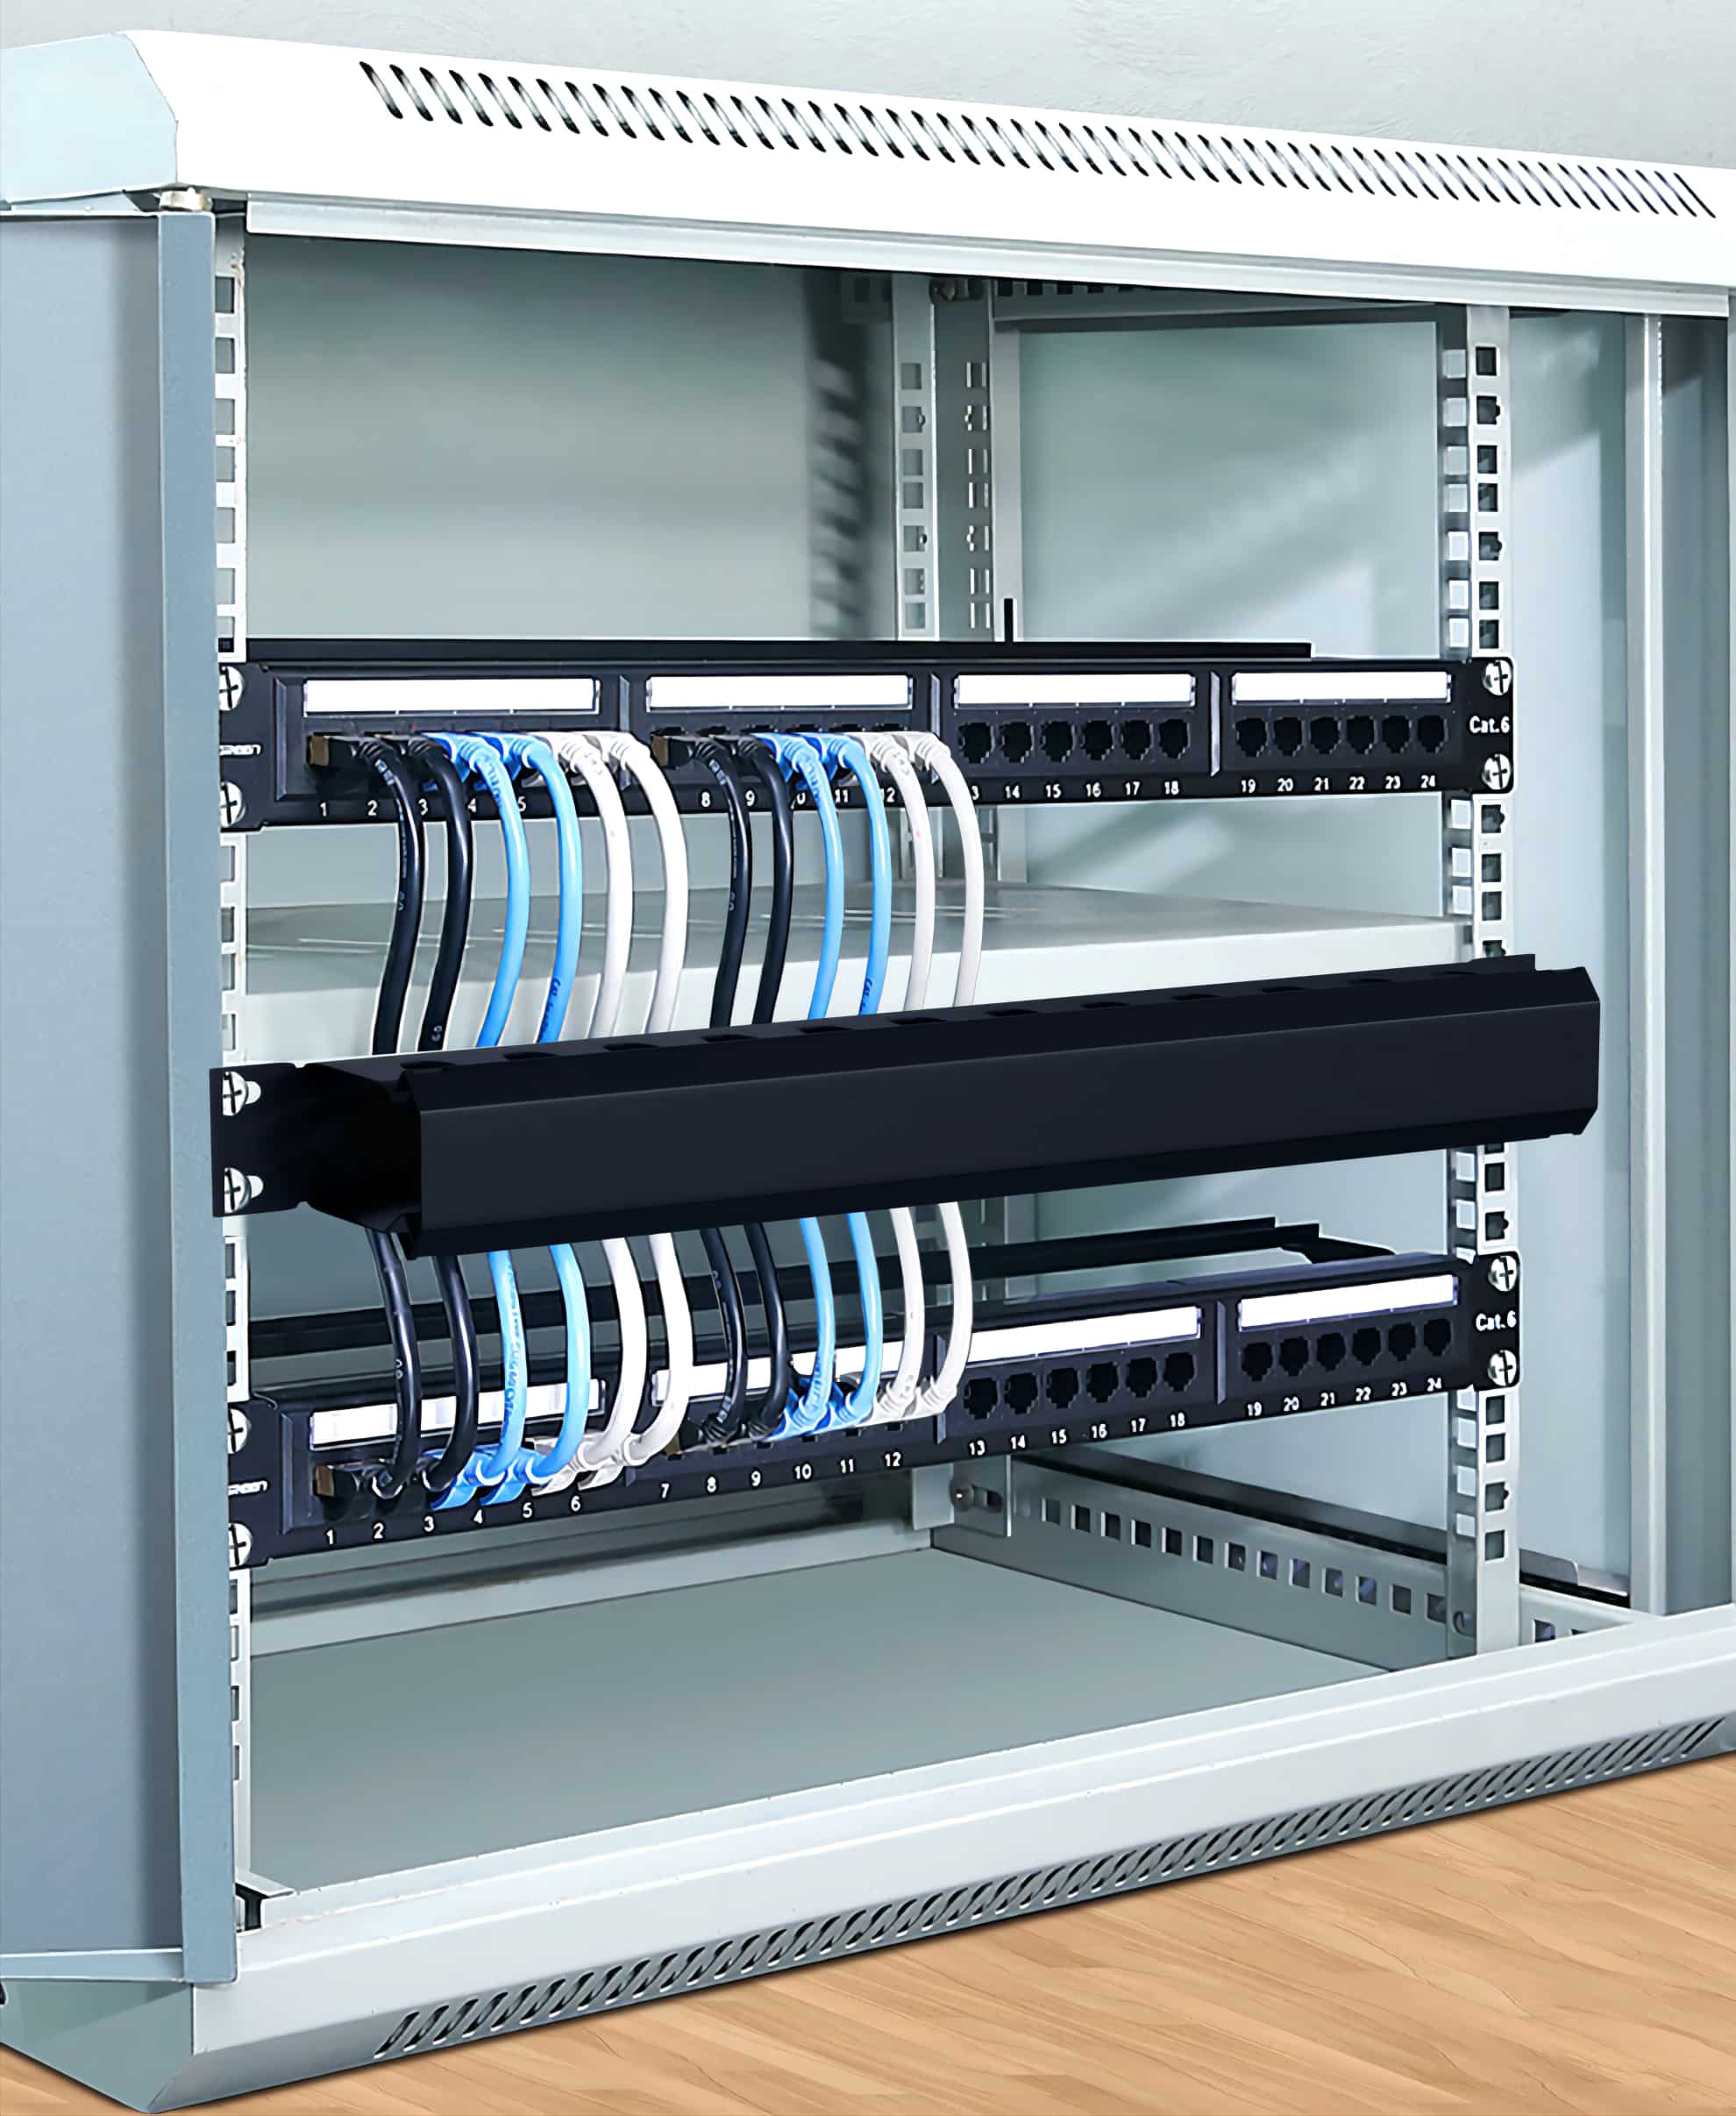 Fiber Optic Cable Manager|19 Inch 12 24 Slots Single Side Horizontal Cable Management Arm